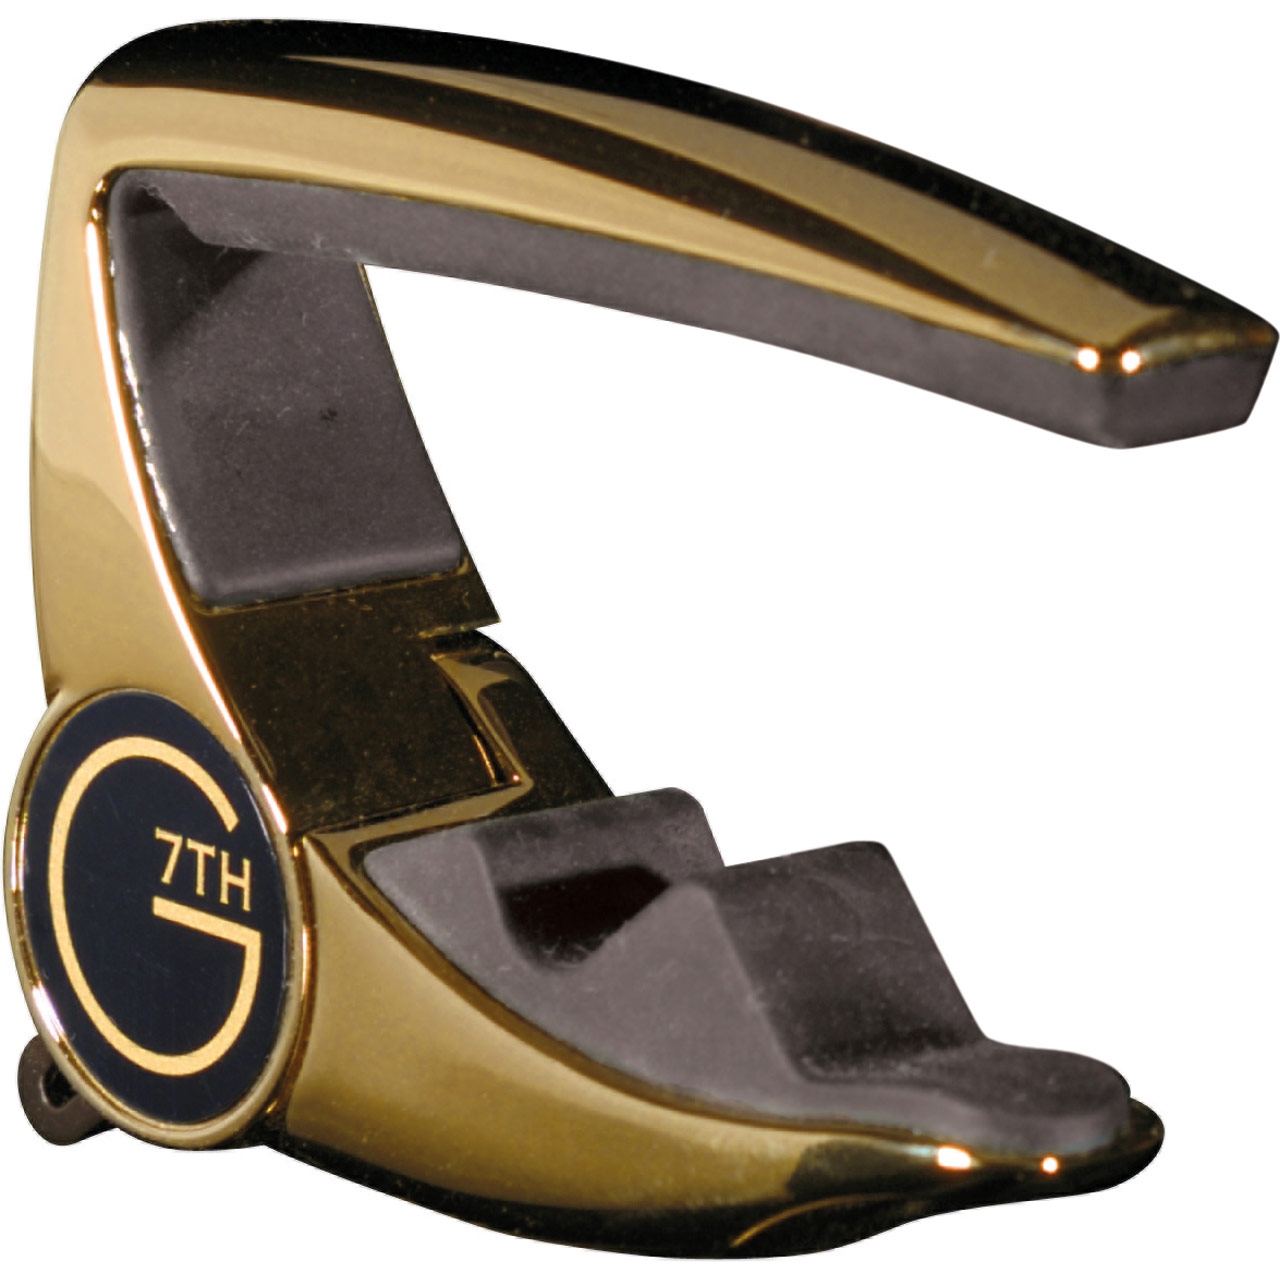 G7th Special Edition Gold Performance Capo + Tin